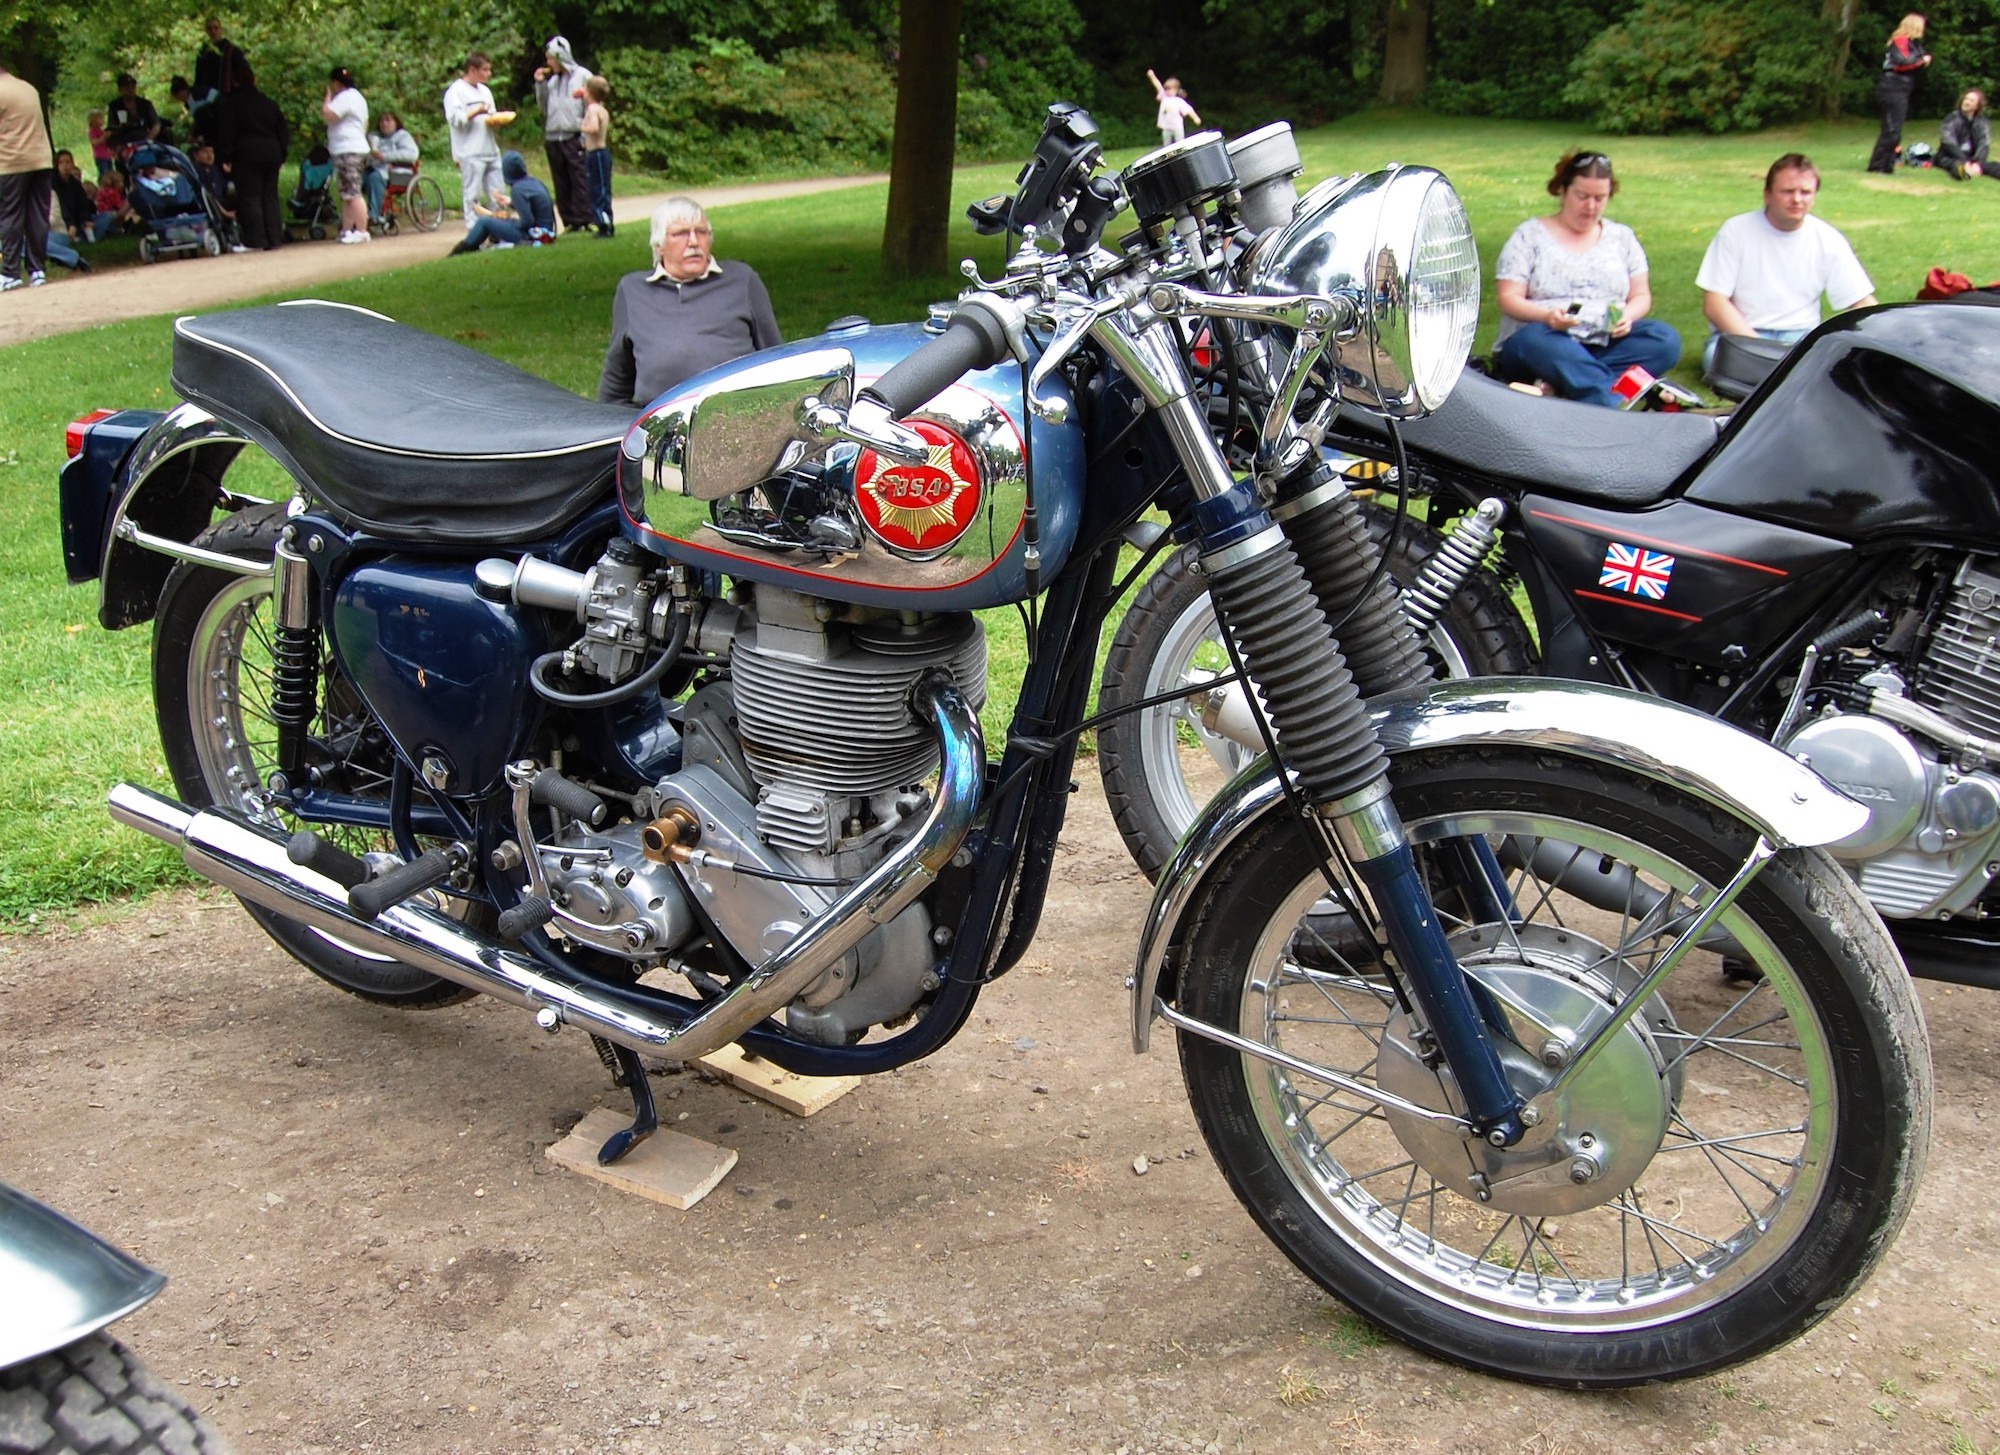 BSA's recent addition to their lineup - the Gold Star. Media sourced from Wikipedia.